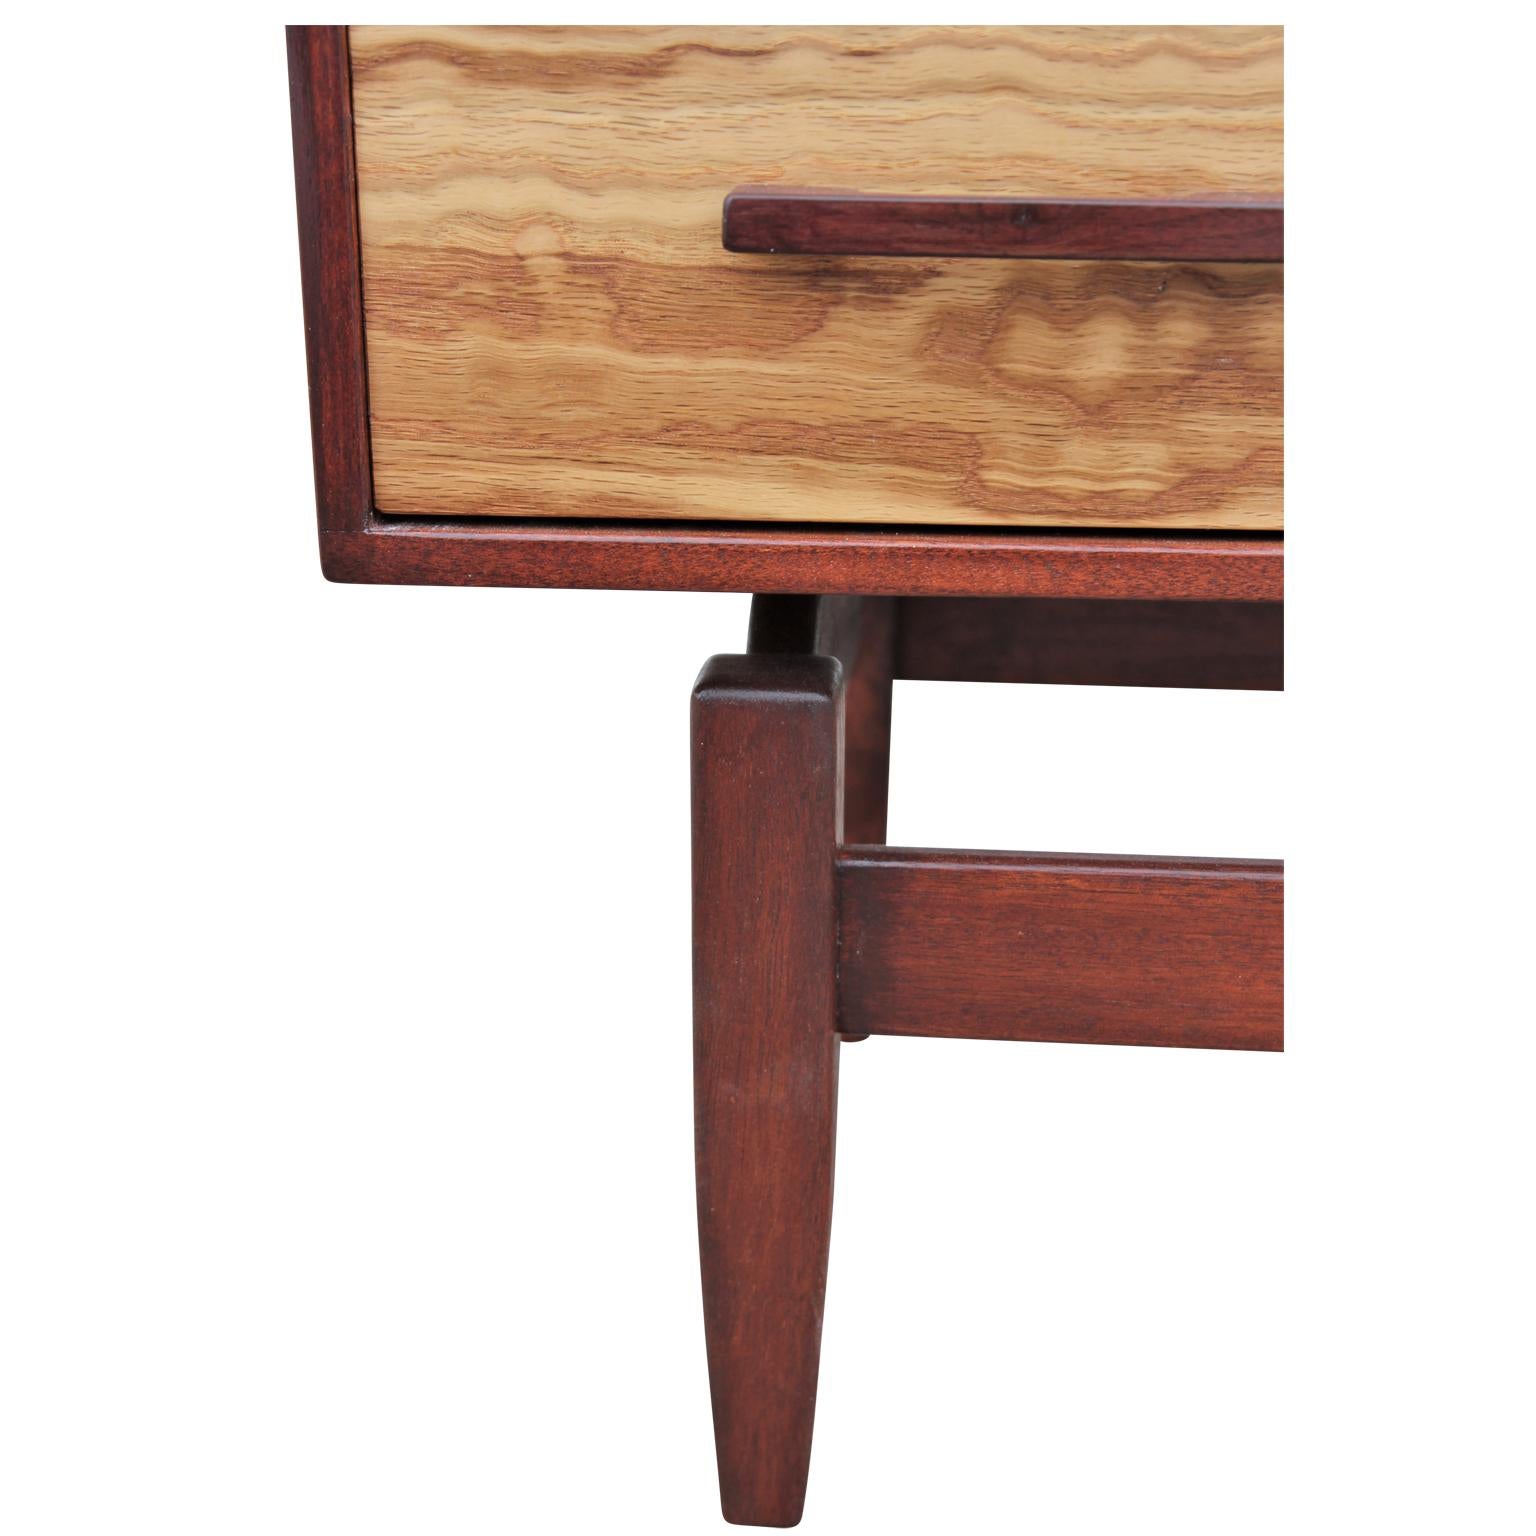 North American Modern Texas Natural Oak Floating Three Drawer Side Table Chest by Norm Stoeker